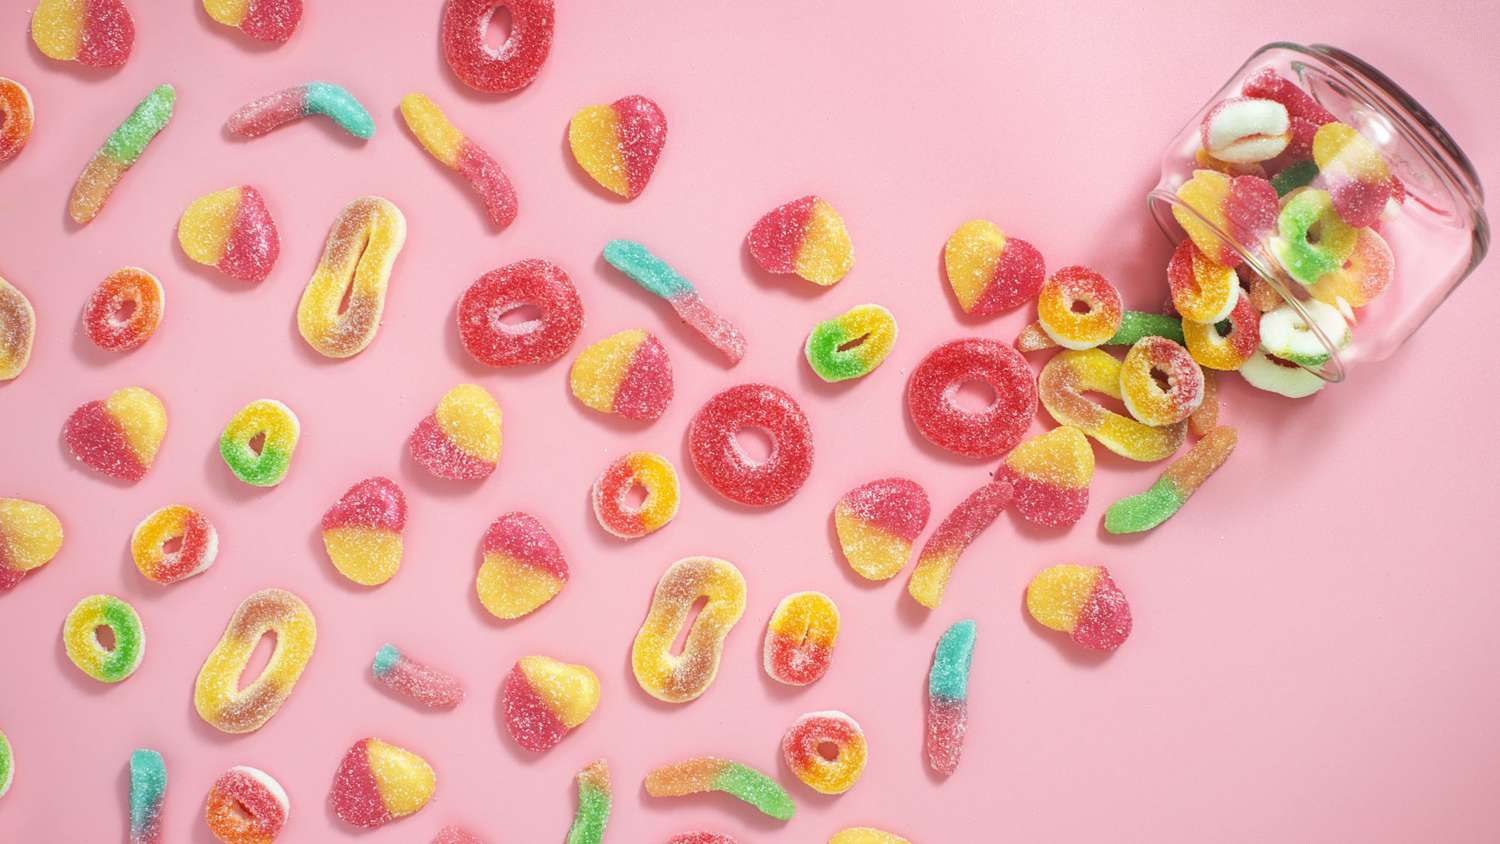 foods-you-should-avoid: gummy candy